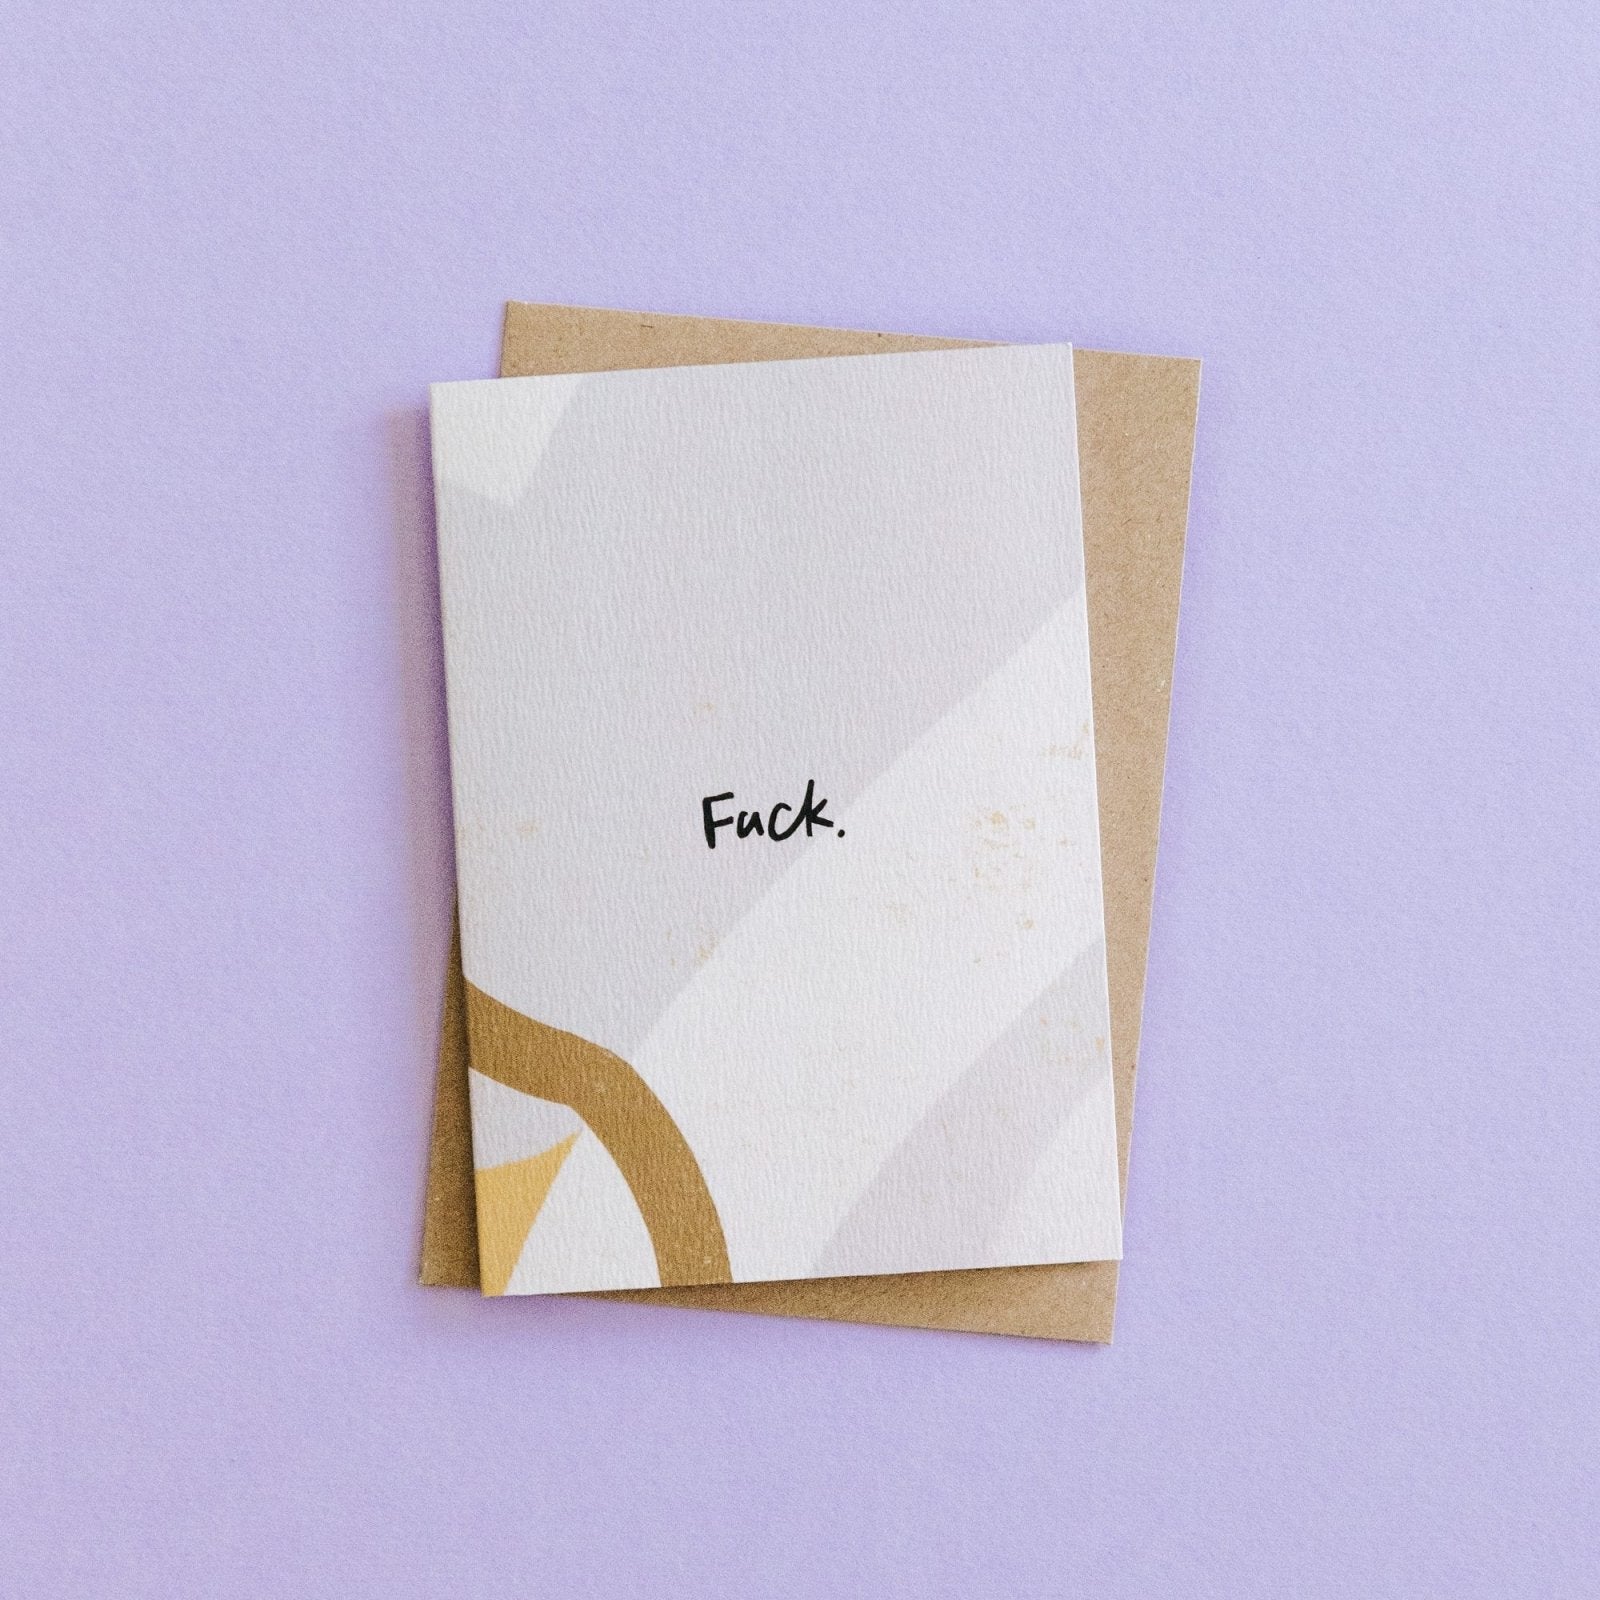 Blunt Thinking of You Card 'Fuck.' - I am Nat Ltd - Greeting Card